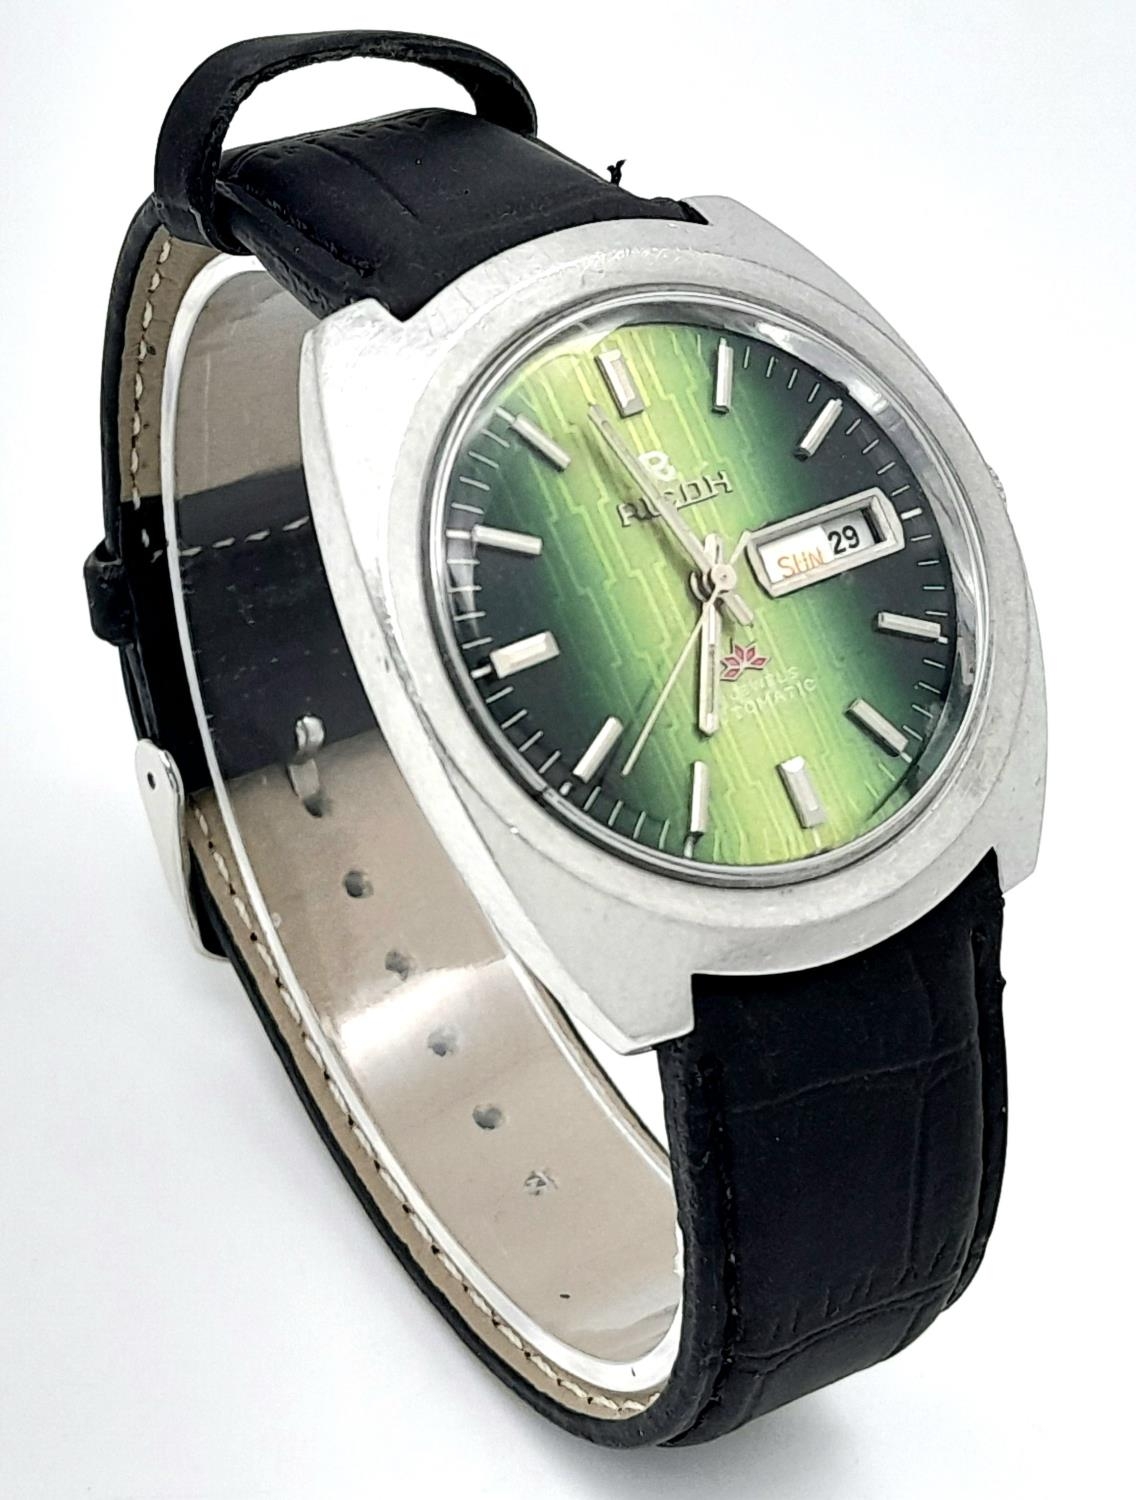 A Vintage Ricoh Automatic Gents Watch. Black leather strap. Stainless steel case - 38mm. Green - Image 3 of 6